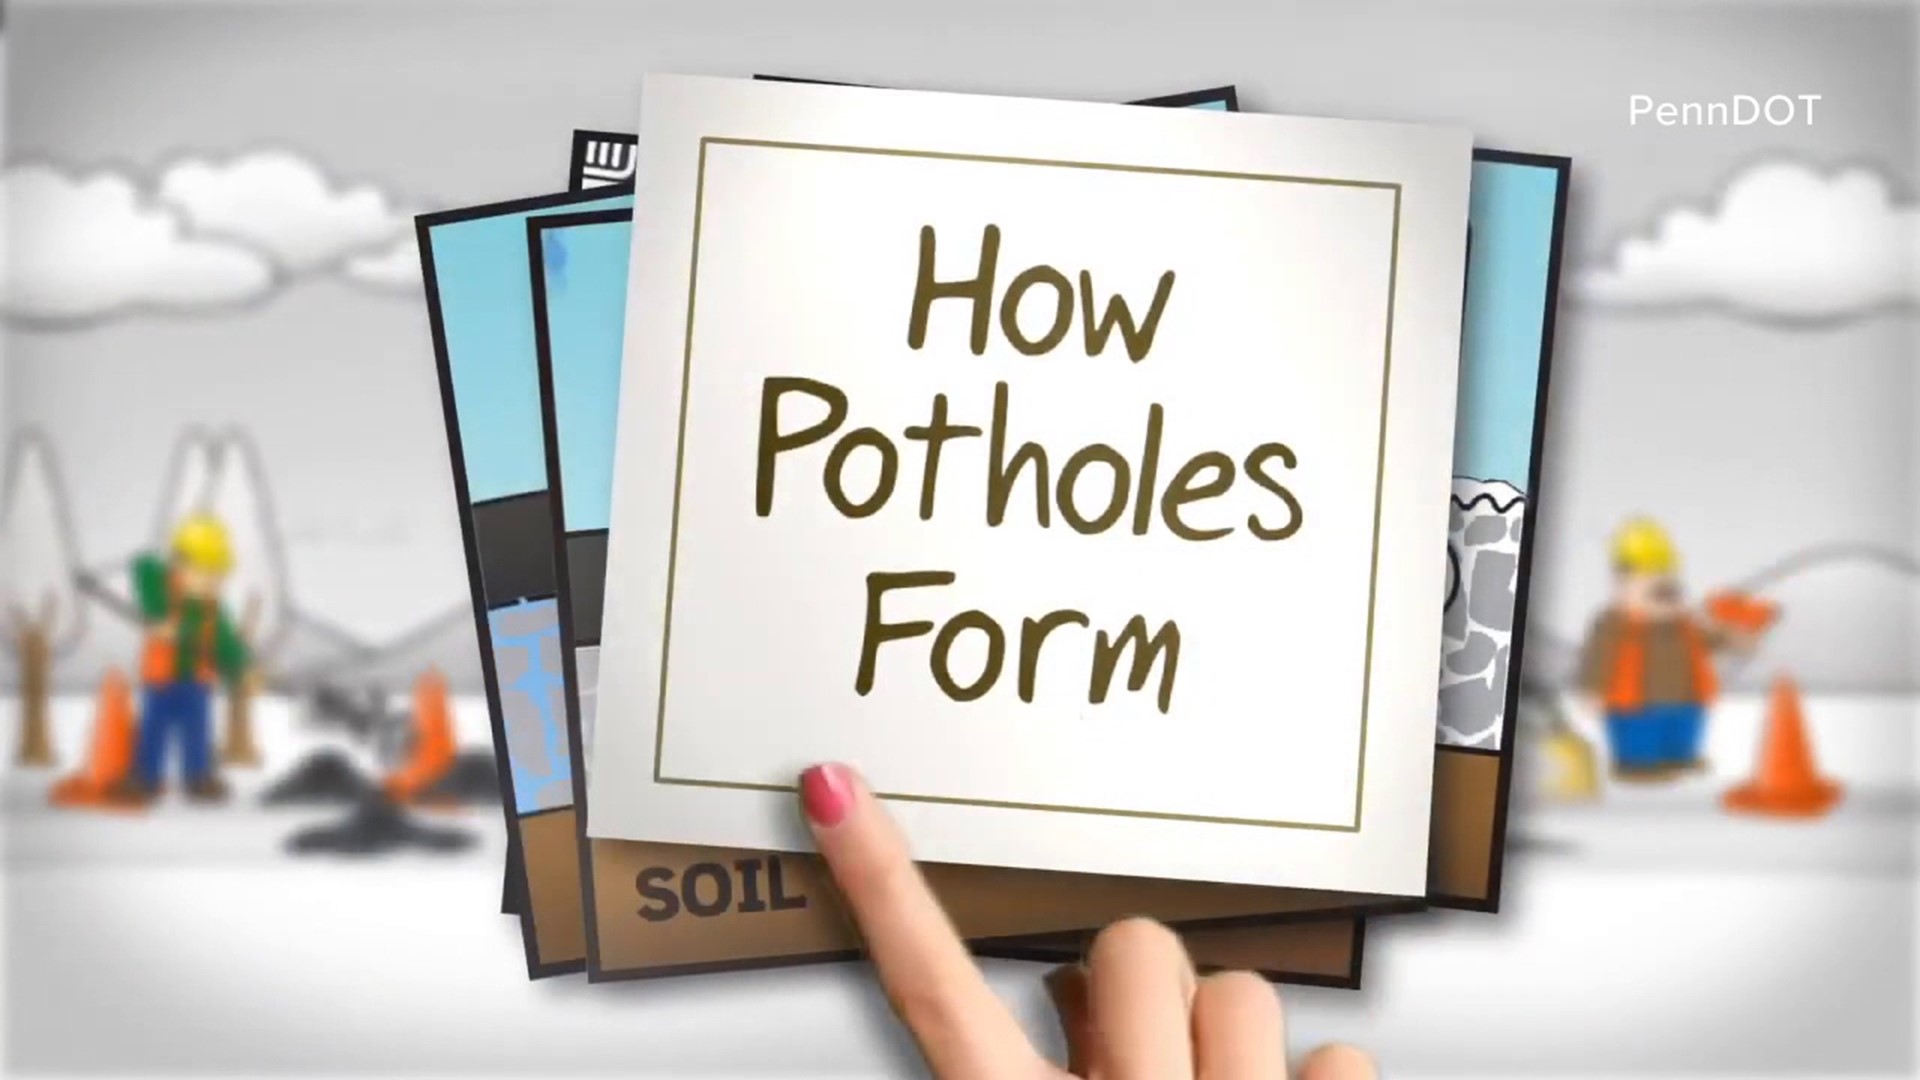 It's pothole season here in Pennsylvania and potholes are formed as a direct result of the weather.